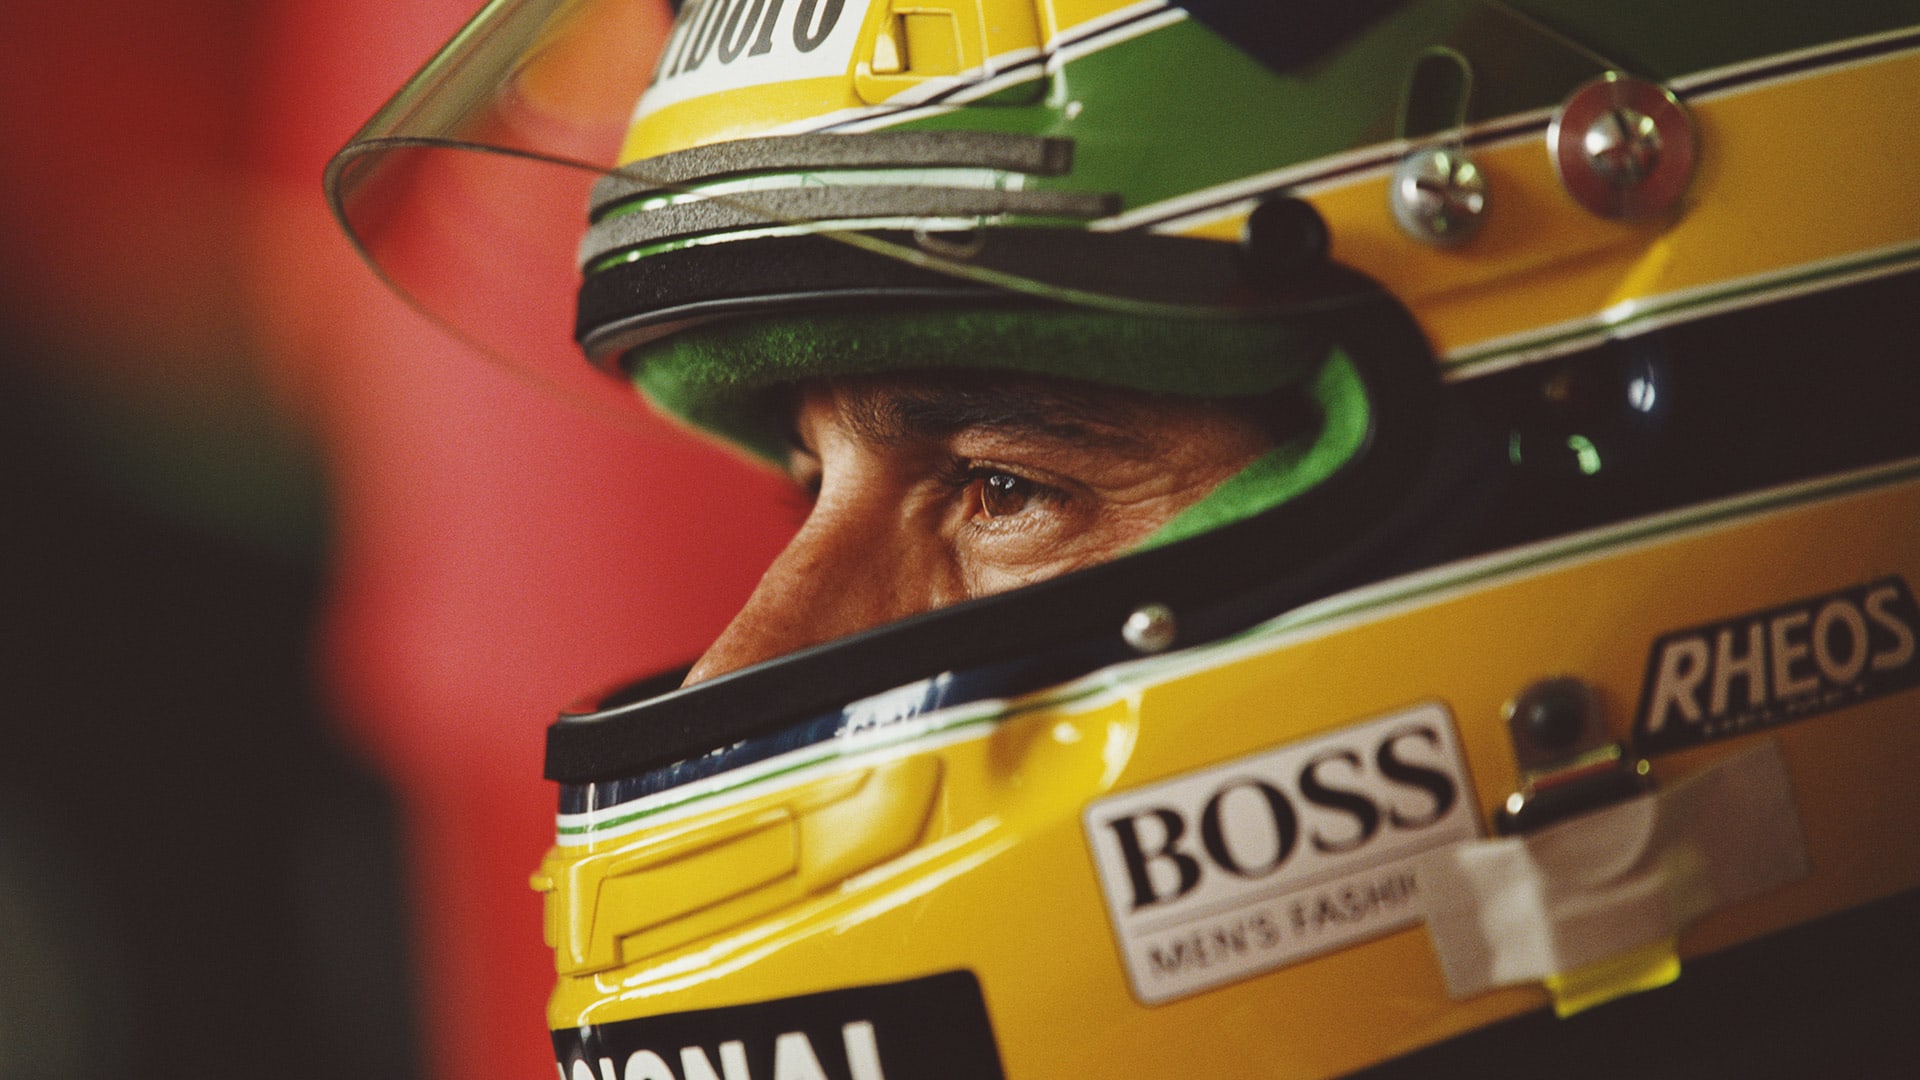 Ayrton Senna His Top 10 Greatest Moments In F1 From His First Win To That Magical Monaco Pole